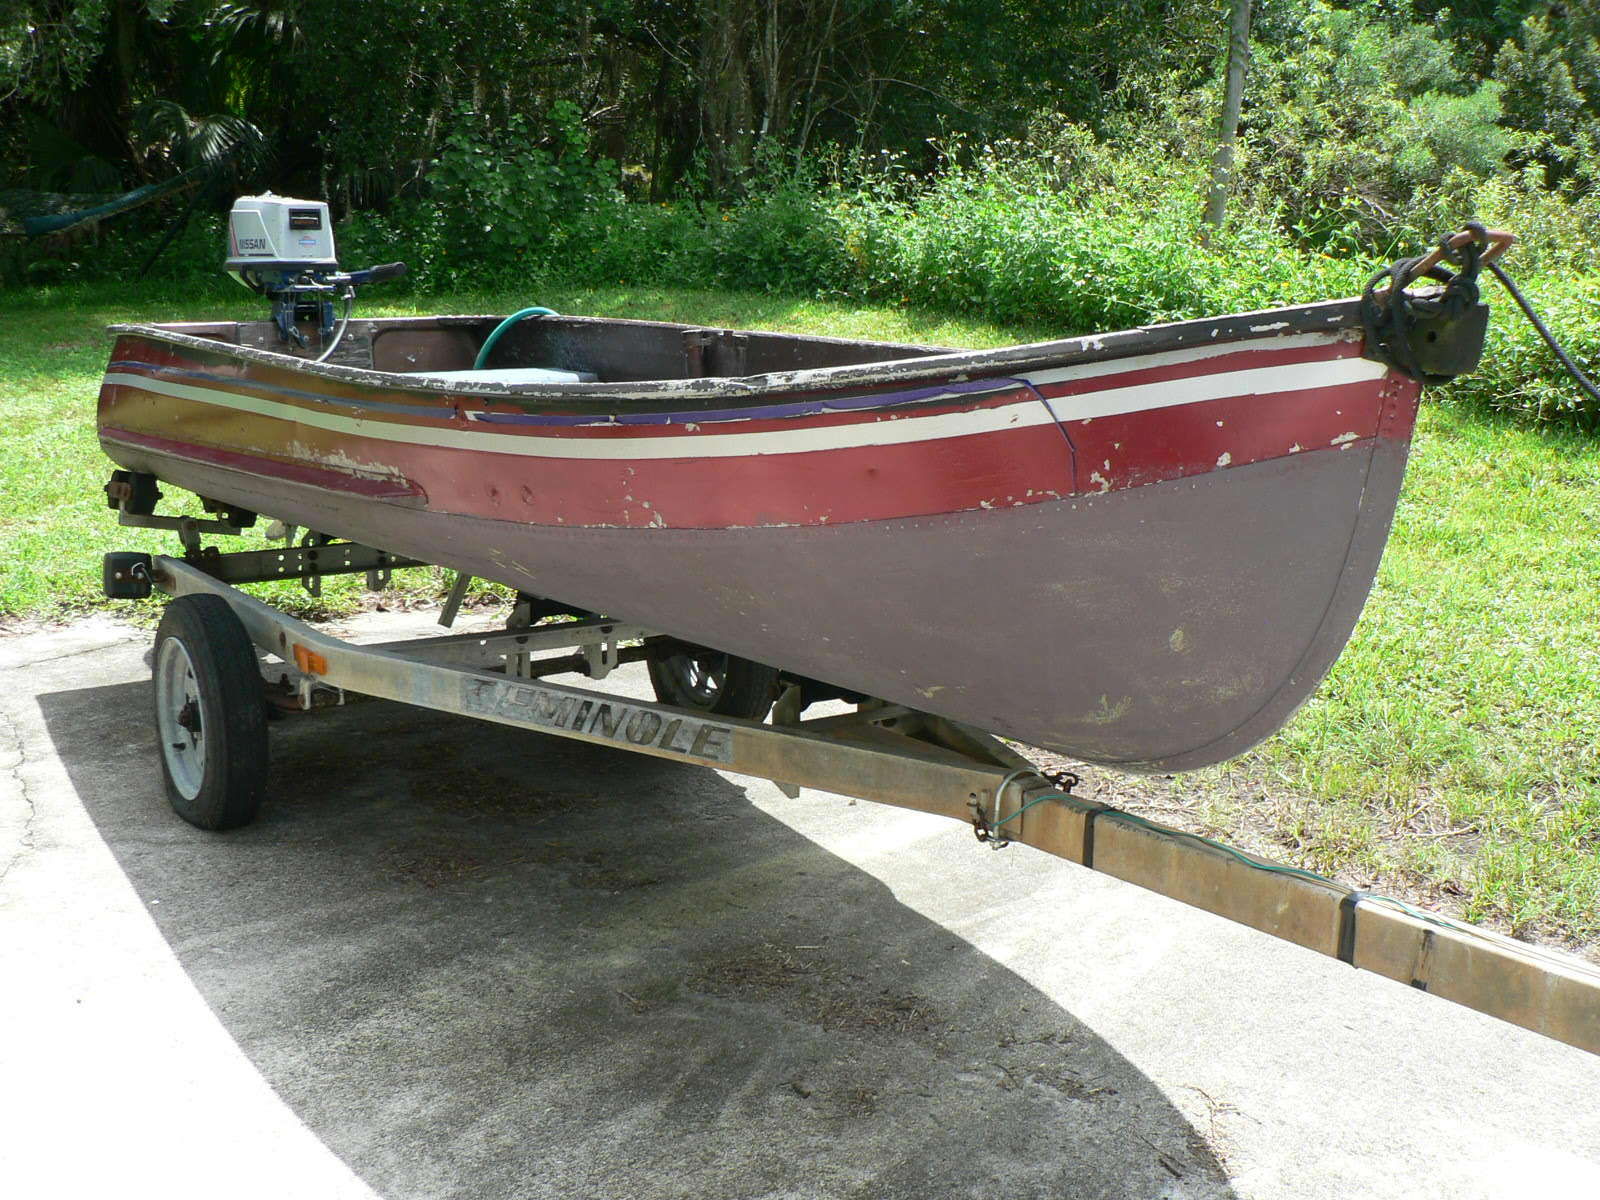 ... OUTBOARD MOTOR PLUS TRAILER-3 BENCH SEATS boat for sale from USA